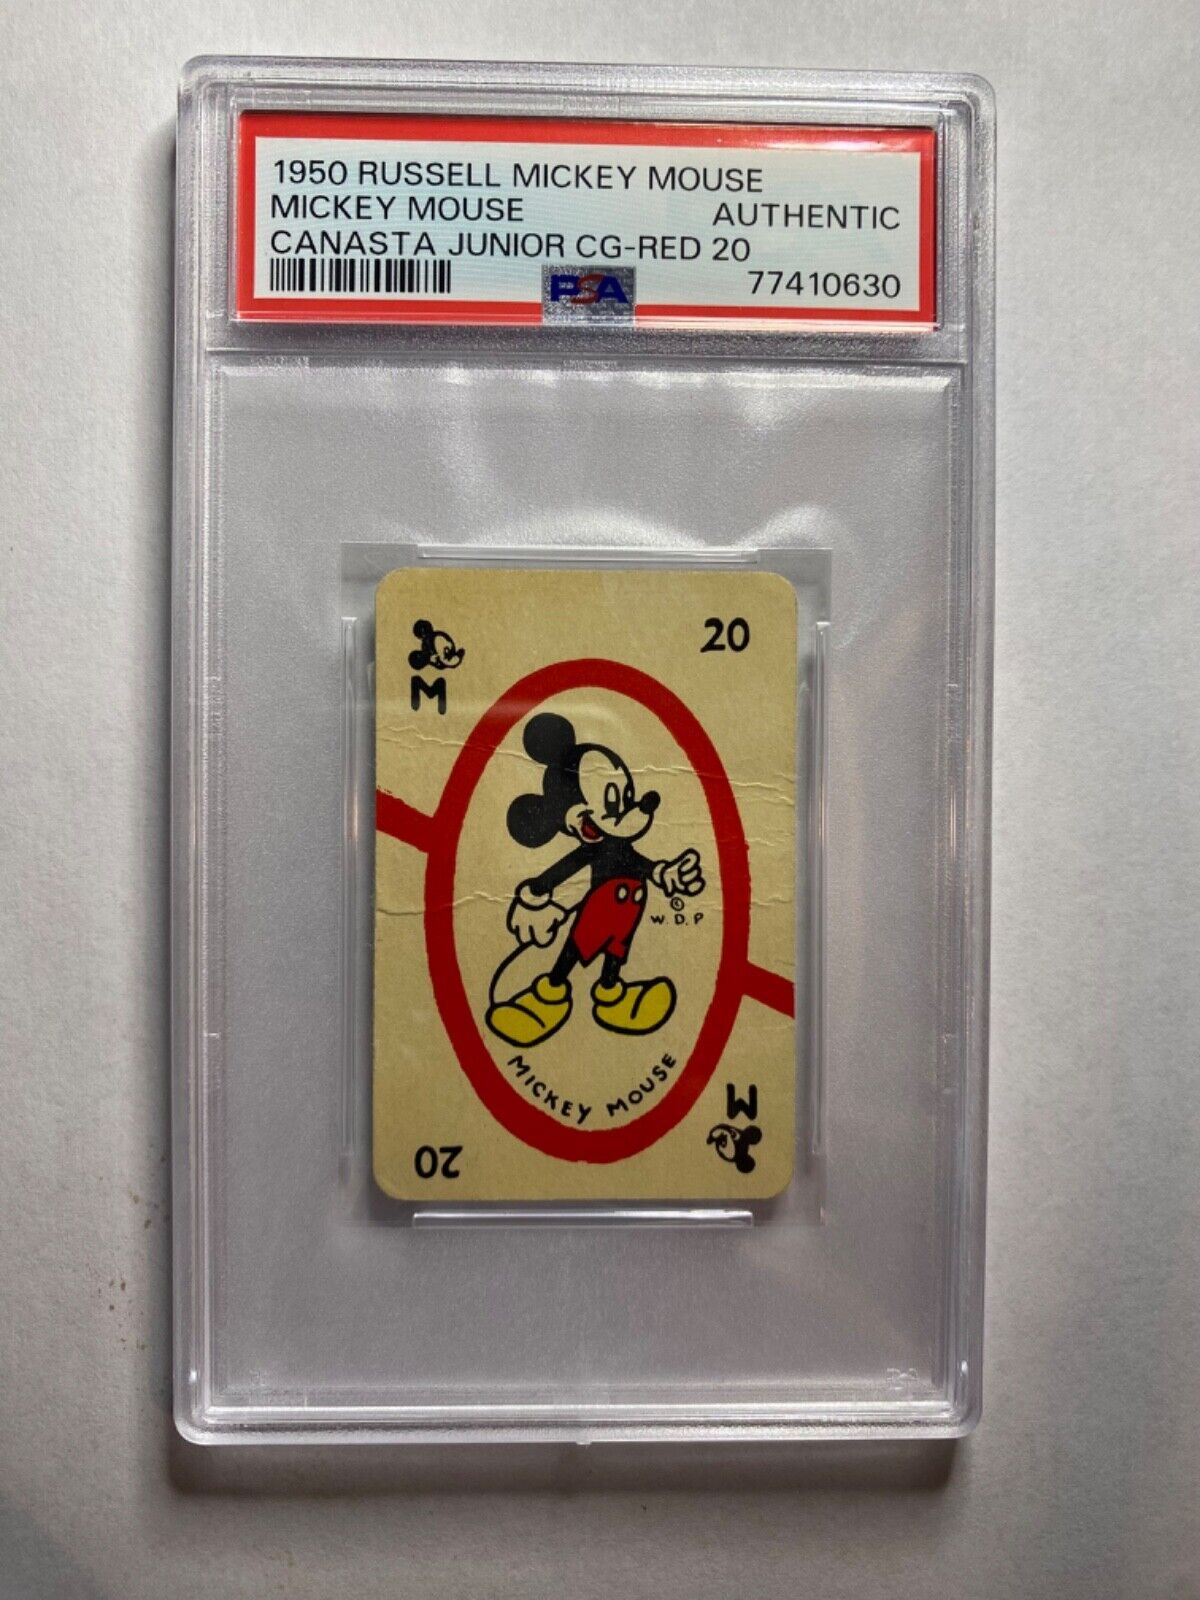 VINTAGE 1950 RUSSELL MICKEY MOUSE CANASTA CG-RED 20 PSA AUTHENTIC DISNEYANA